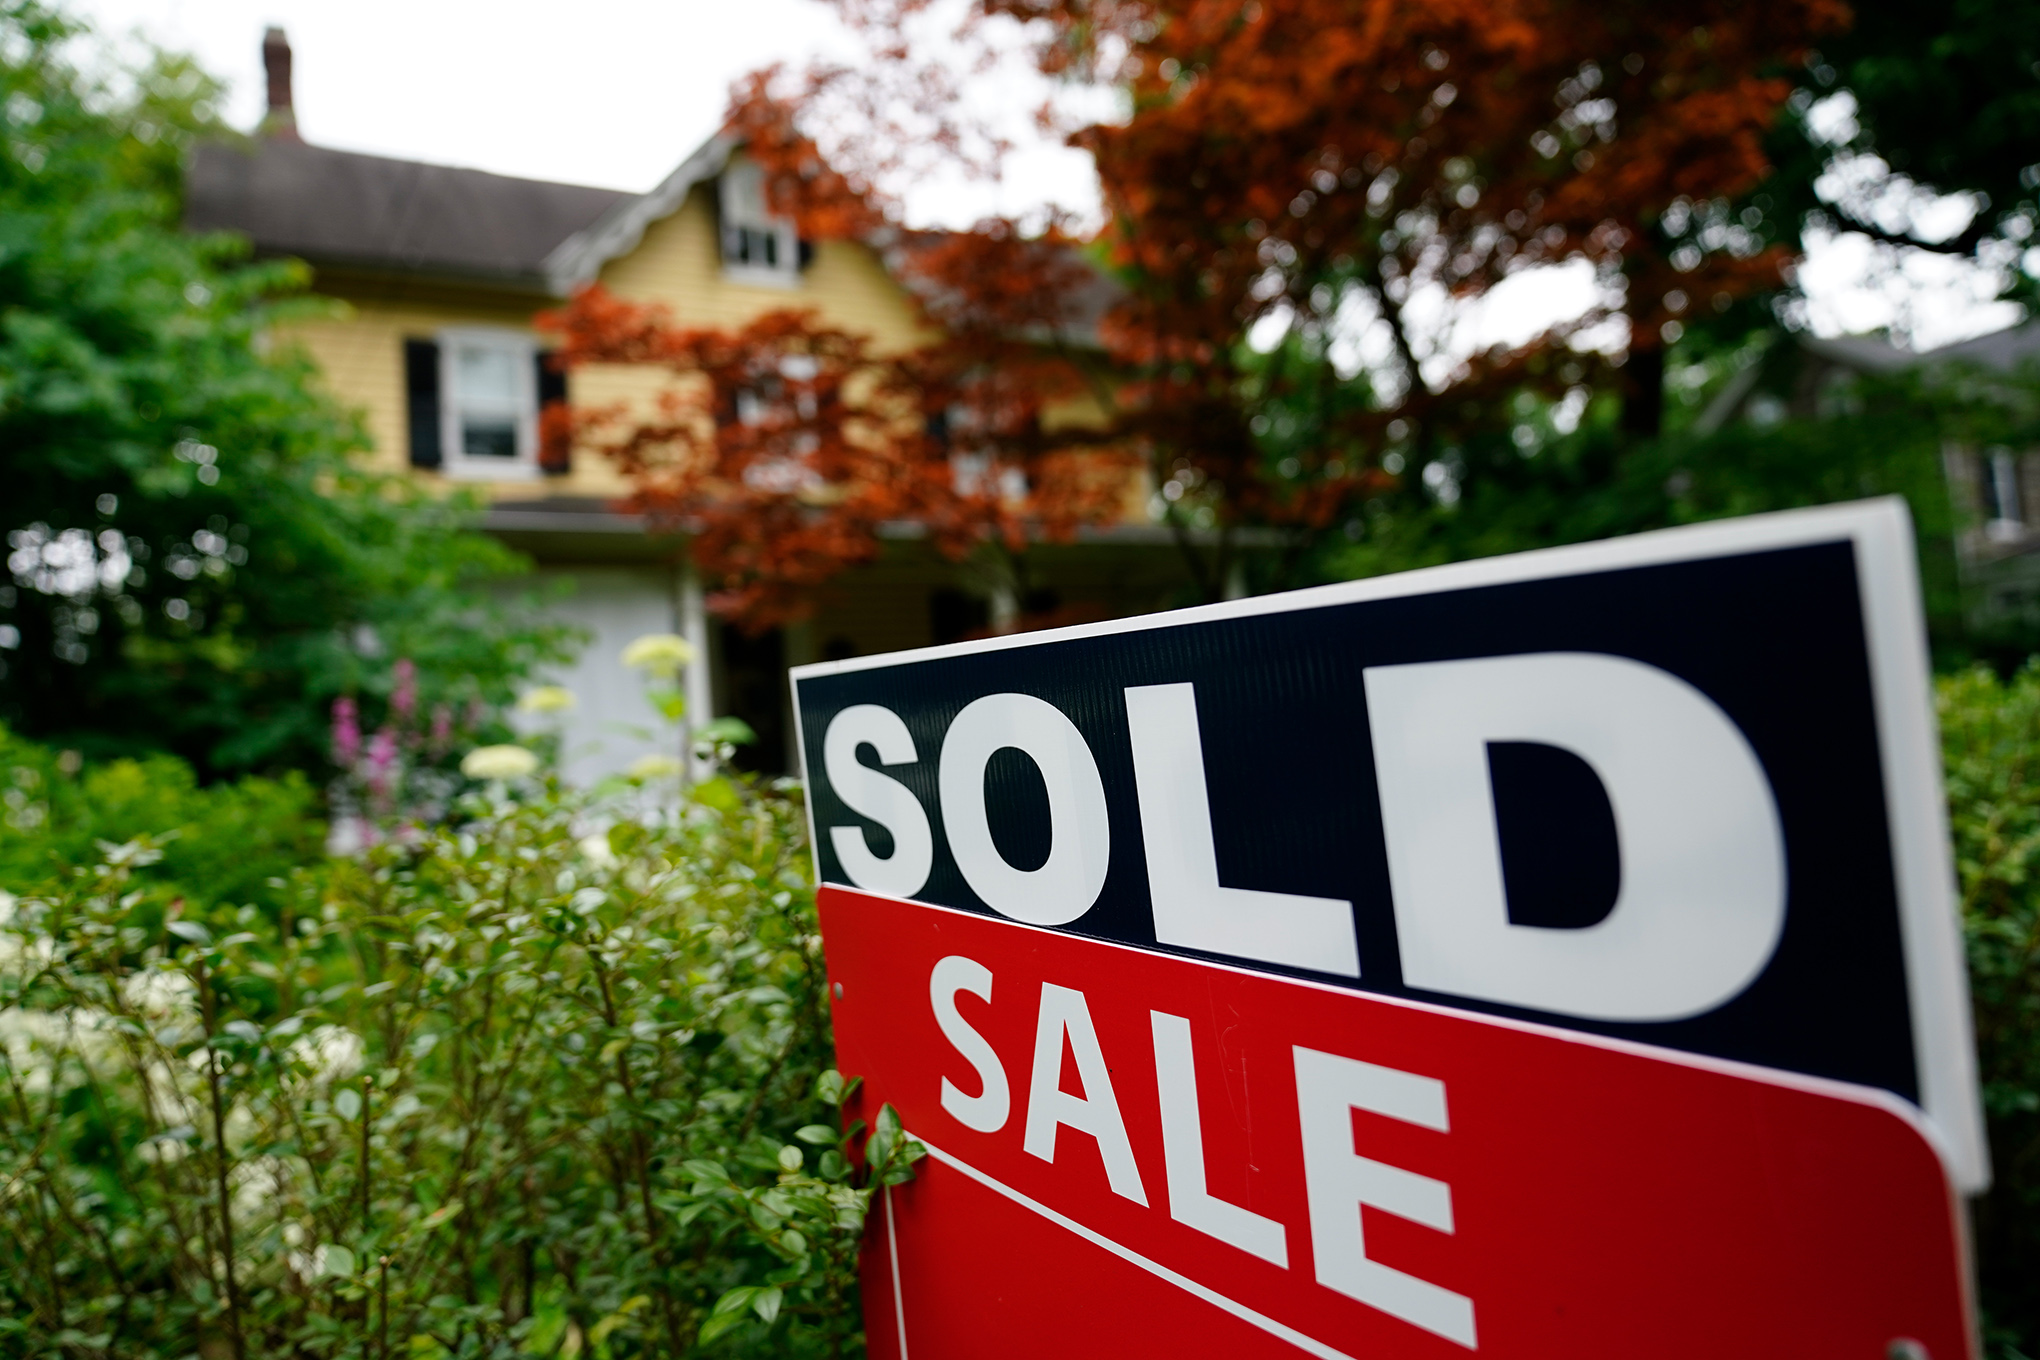 Buying a home in Wisconsin has become less affordable for first-time buyers over the last year